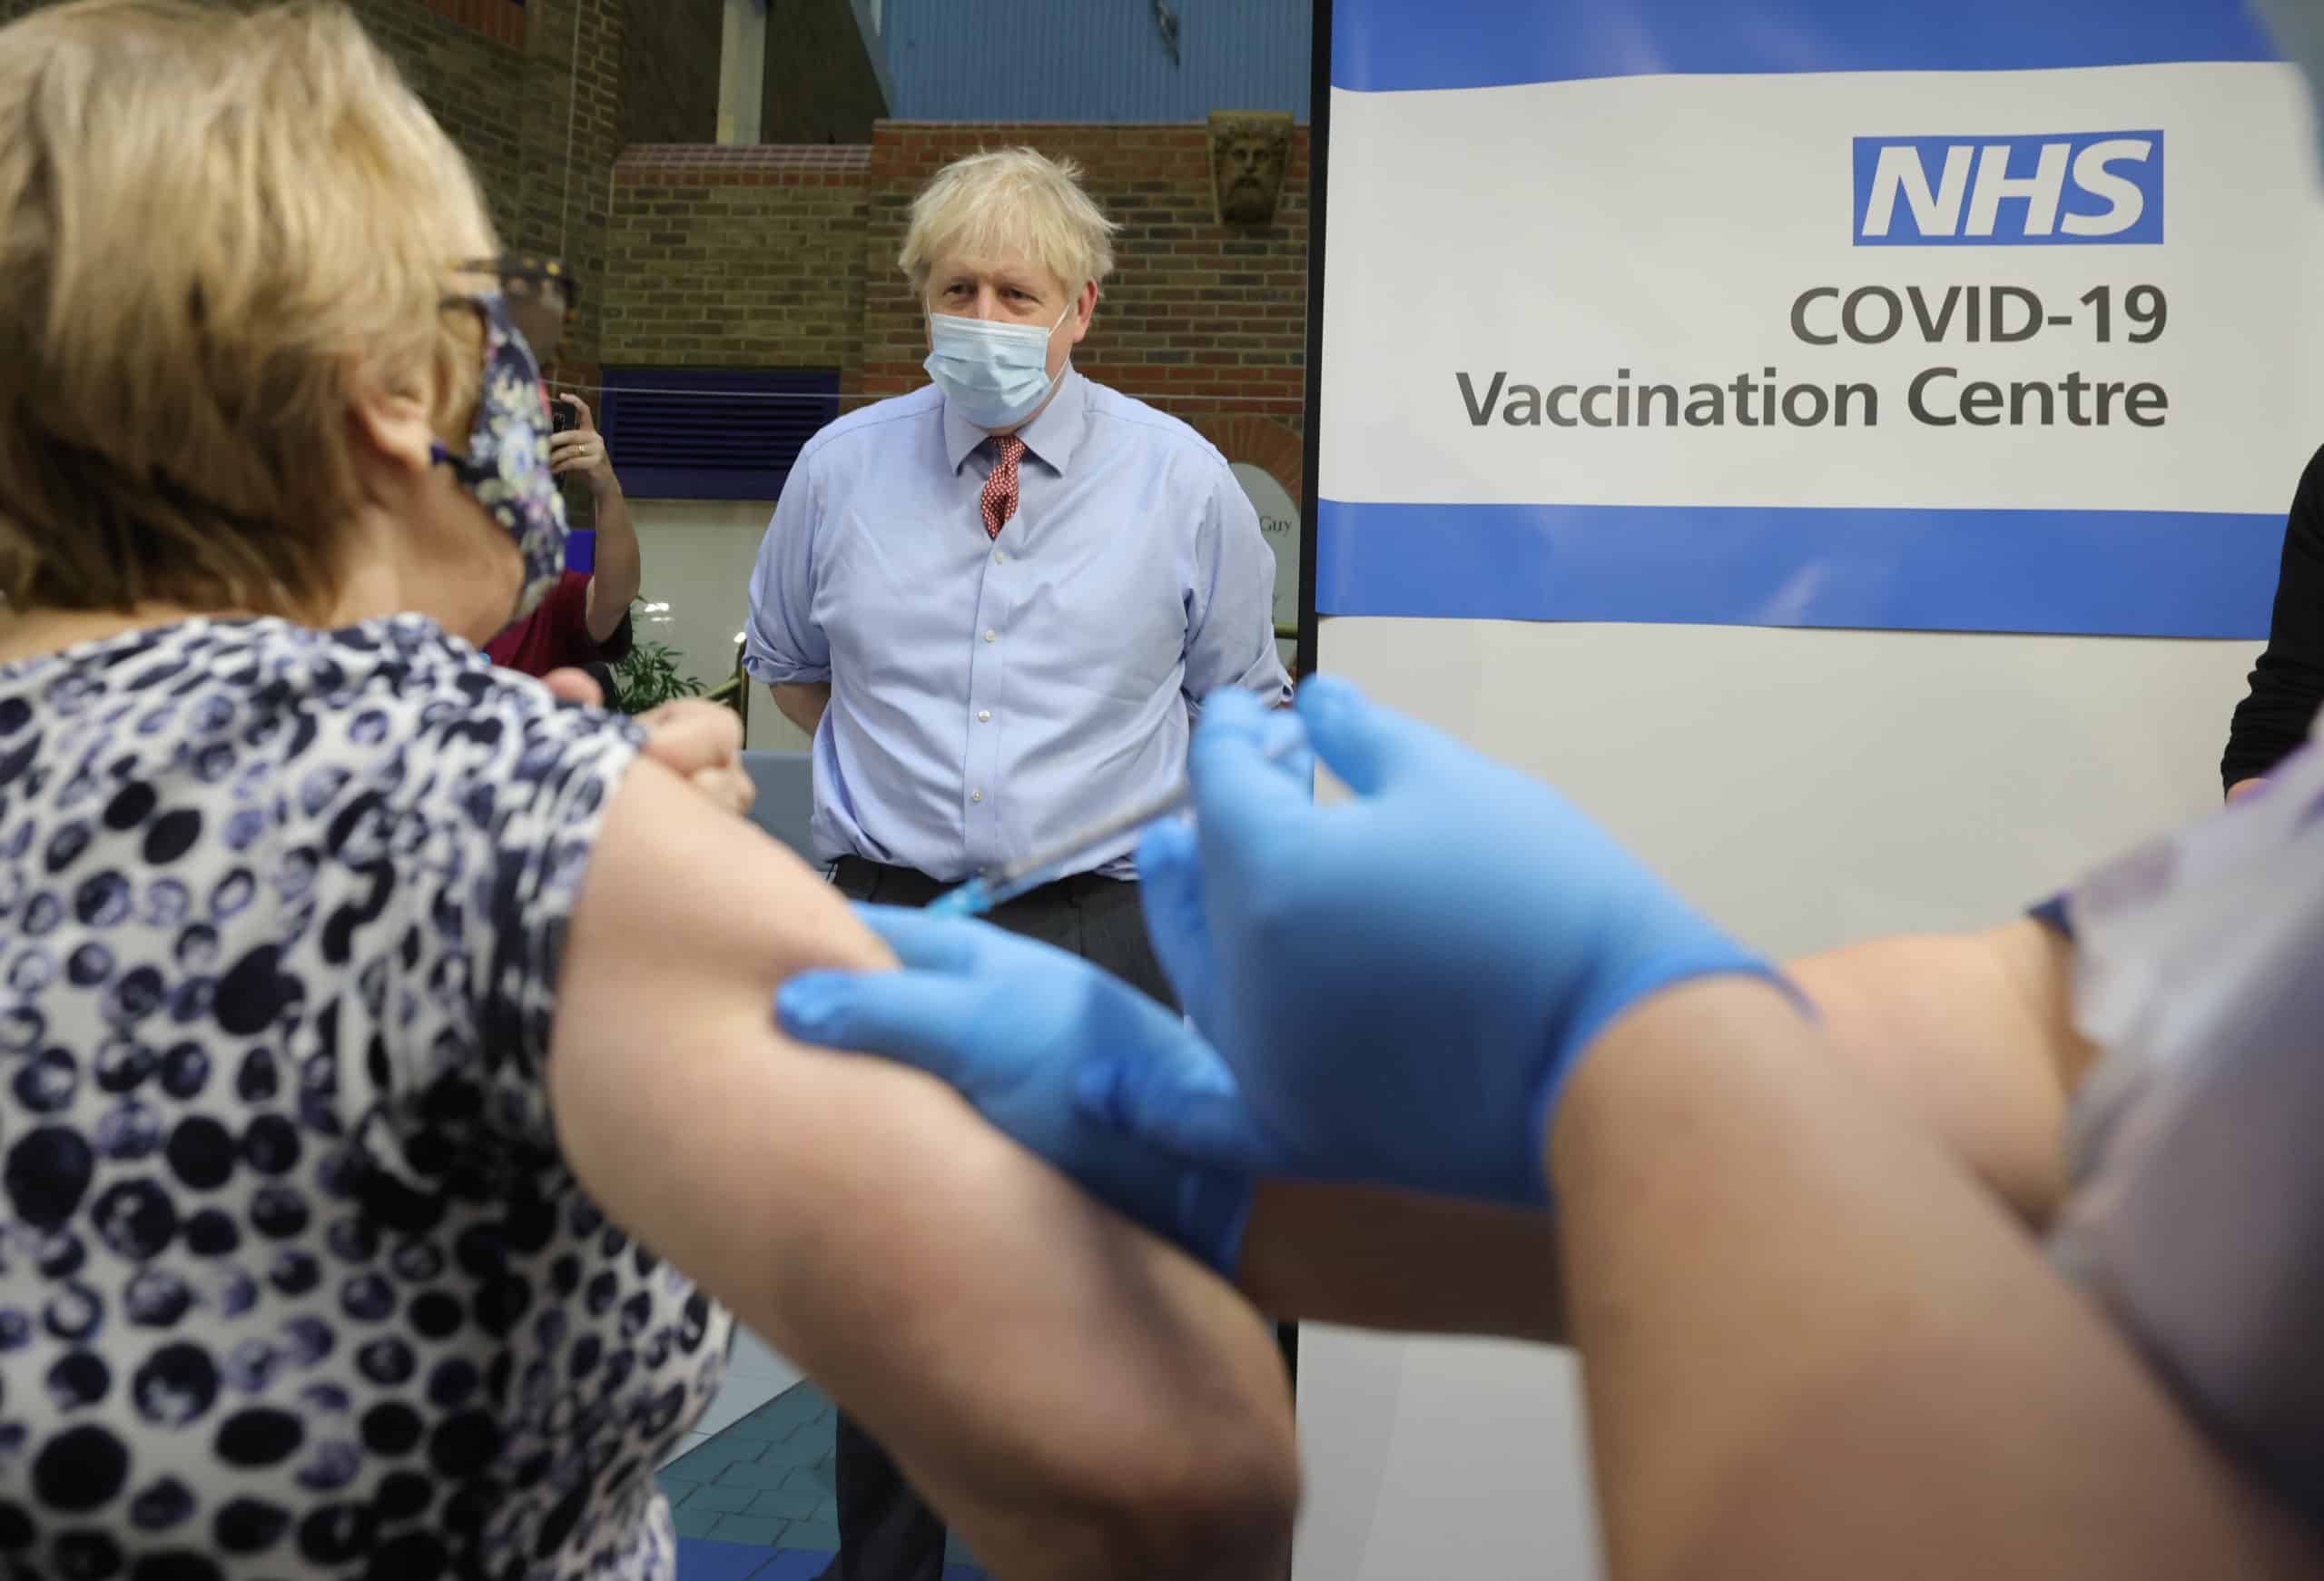 08/12/2020. London, United Kingdom. Boris Johnson visits Covid-19 Vaccine Centre. The Prime Minister watched Lynn have her Covid-19 Vaccine injection at Guy's Hospital in central London, on the day the vaccine was rolled out across the country. Picture by Andrew Parsons / No 10 Downing Street